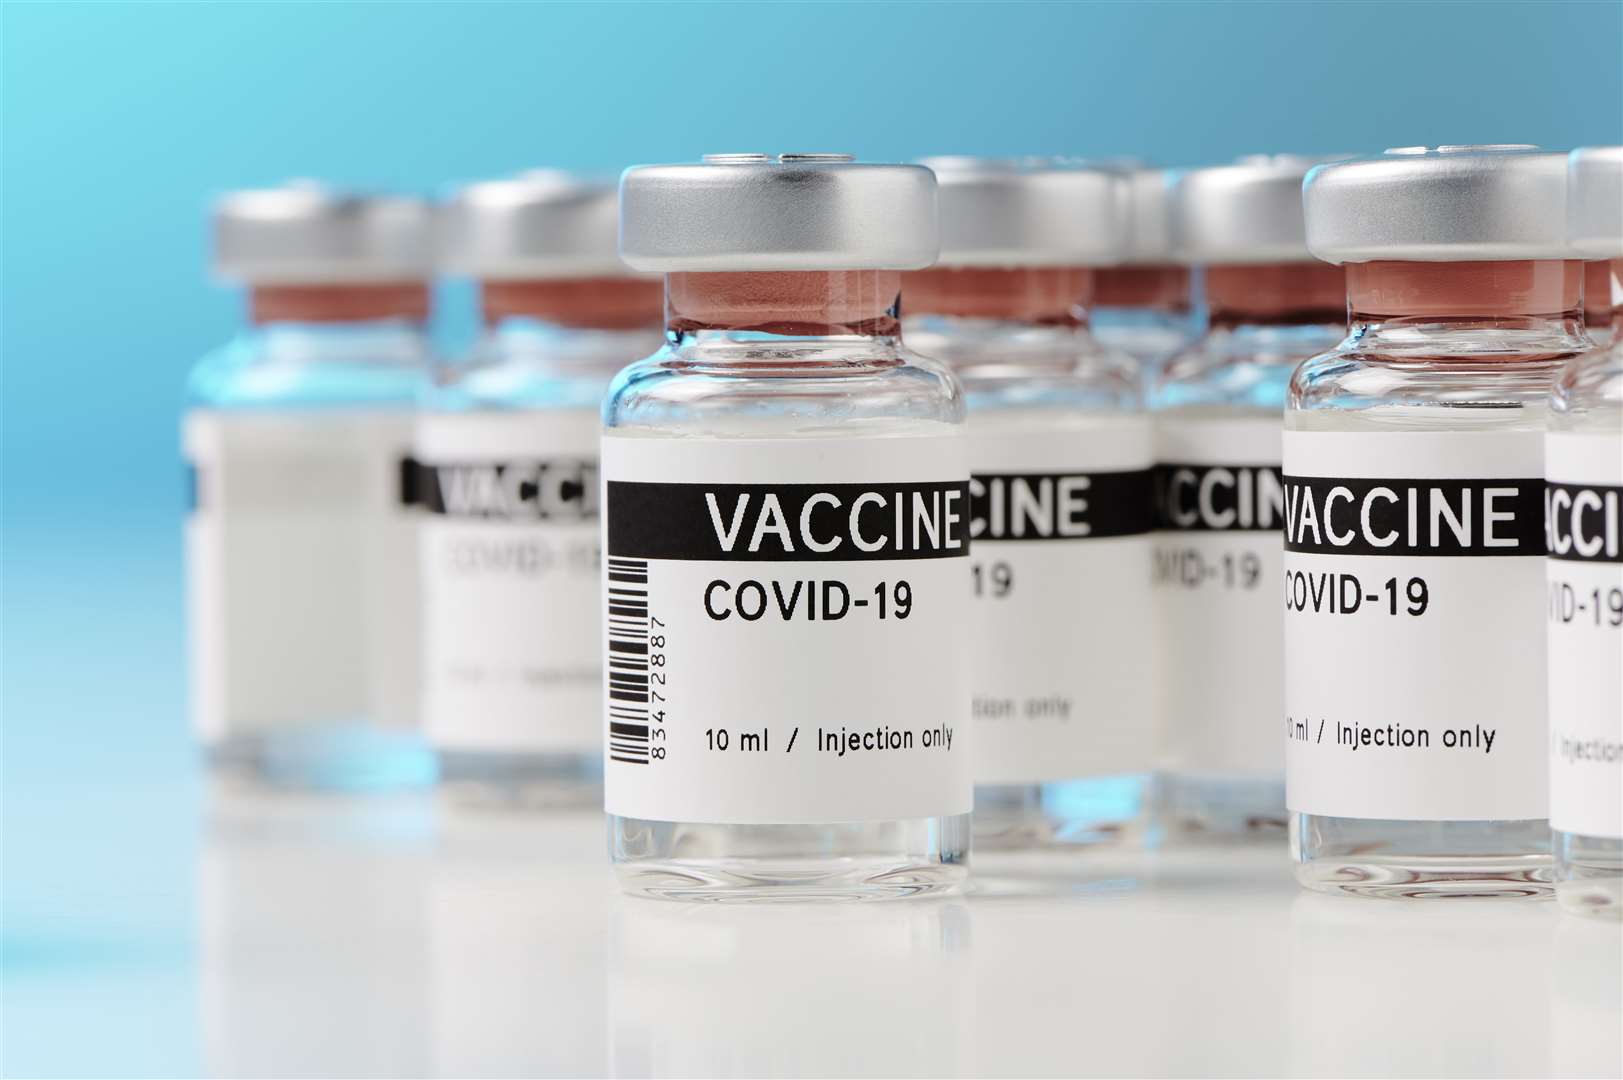 Some ampoules with clear liquid. The vials contain Covid-19 vaccine. The vials are placed in a laboratory against a blue background